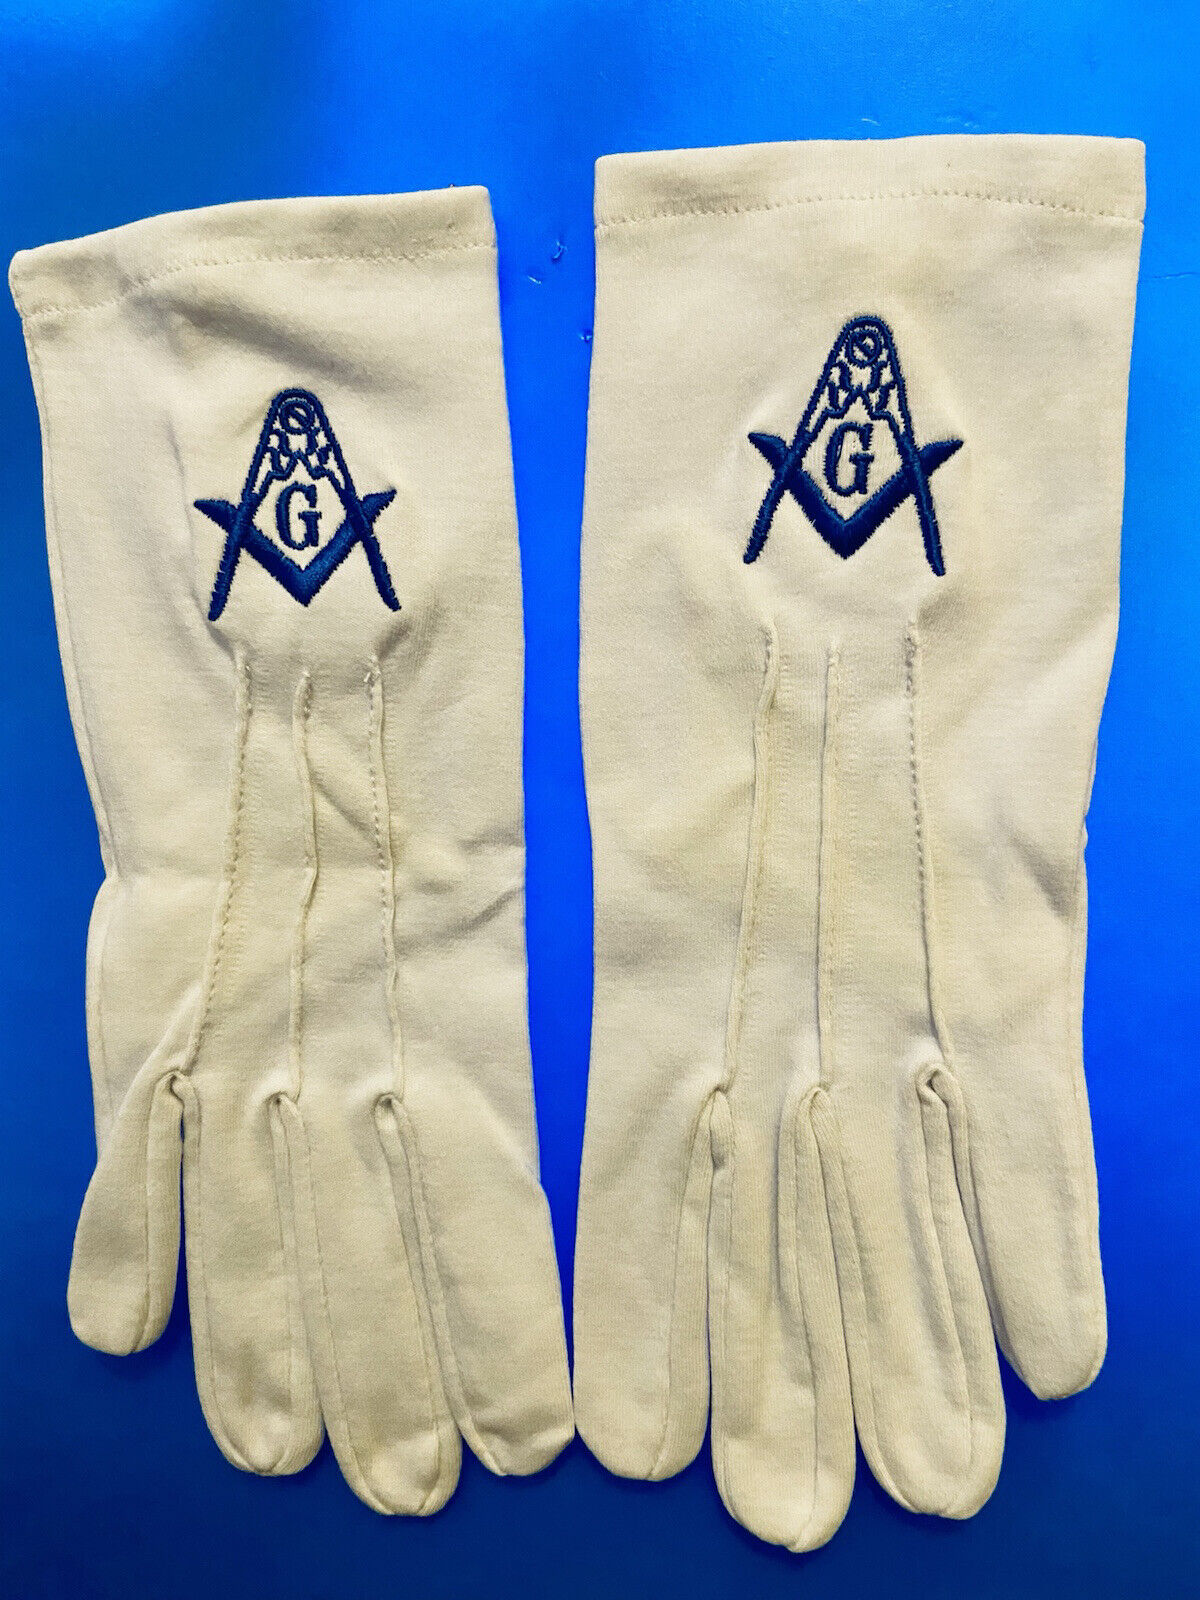 12  MASON EMBROIDERED Cotton Gloves Sizes MED,  LG, and  XL  WHOLESALE $7.00 EA